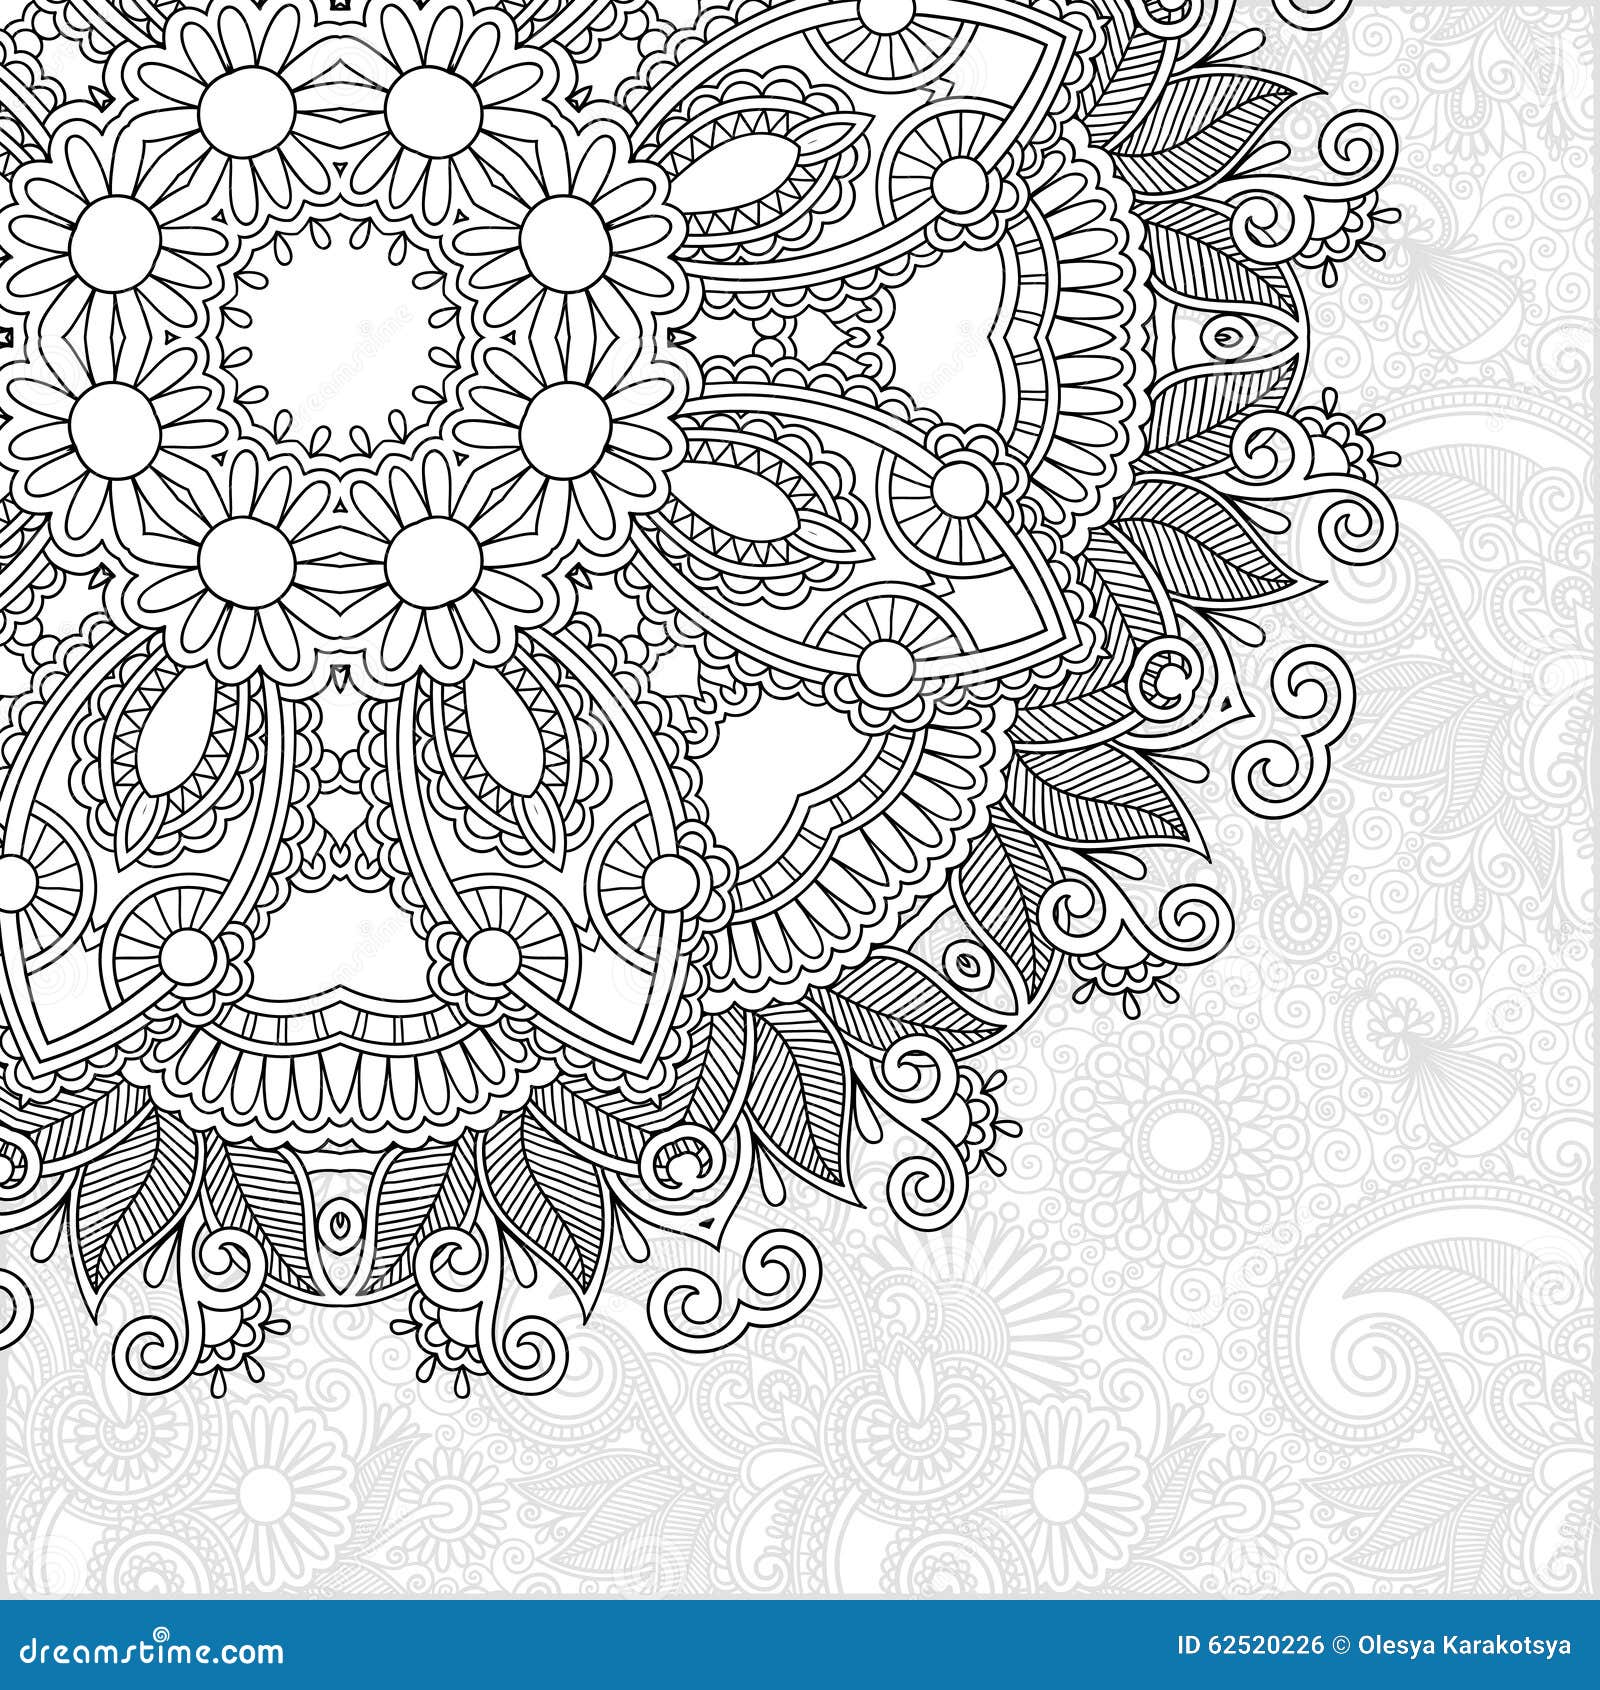 Unique Coloring Book Square Page For Adults Stock Vector